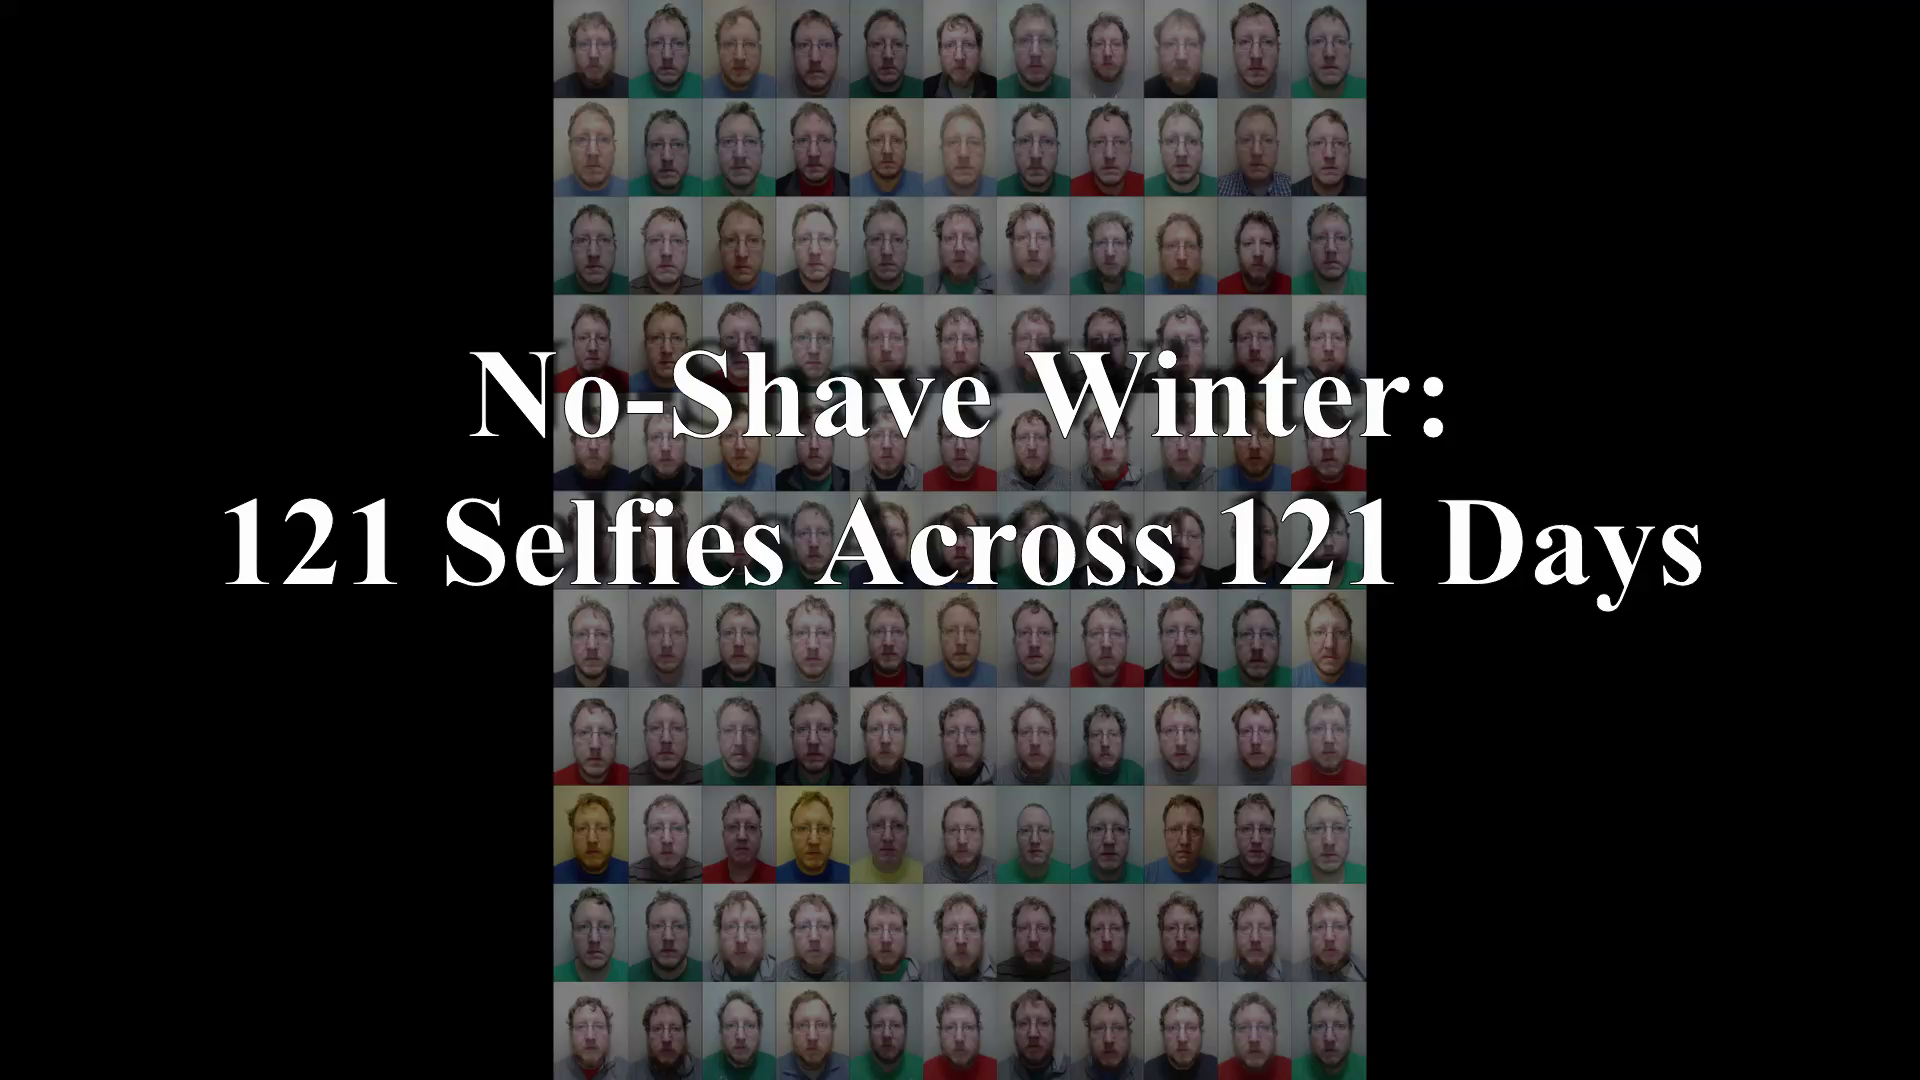 No-Shave Winter - 121 Selfies Across 121 Days